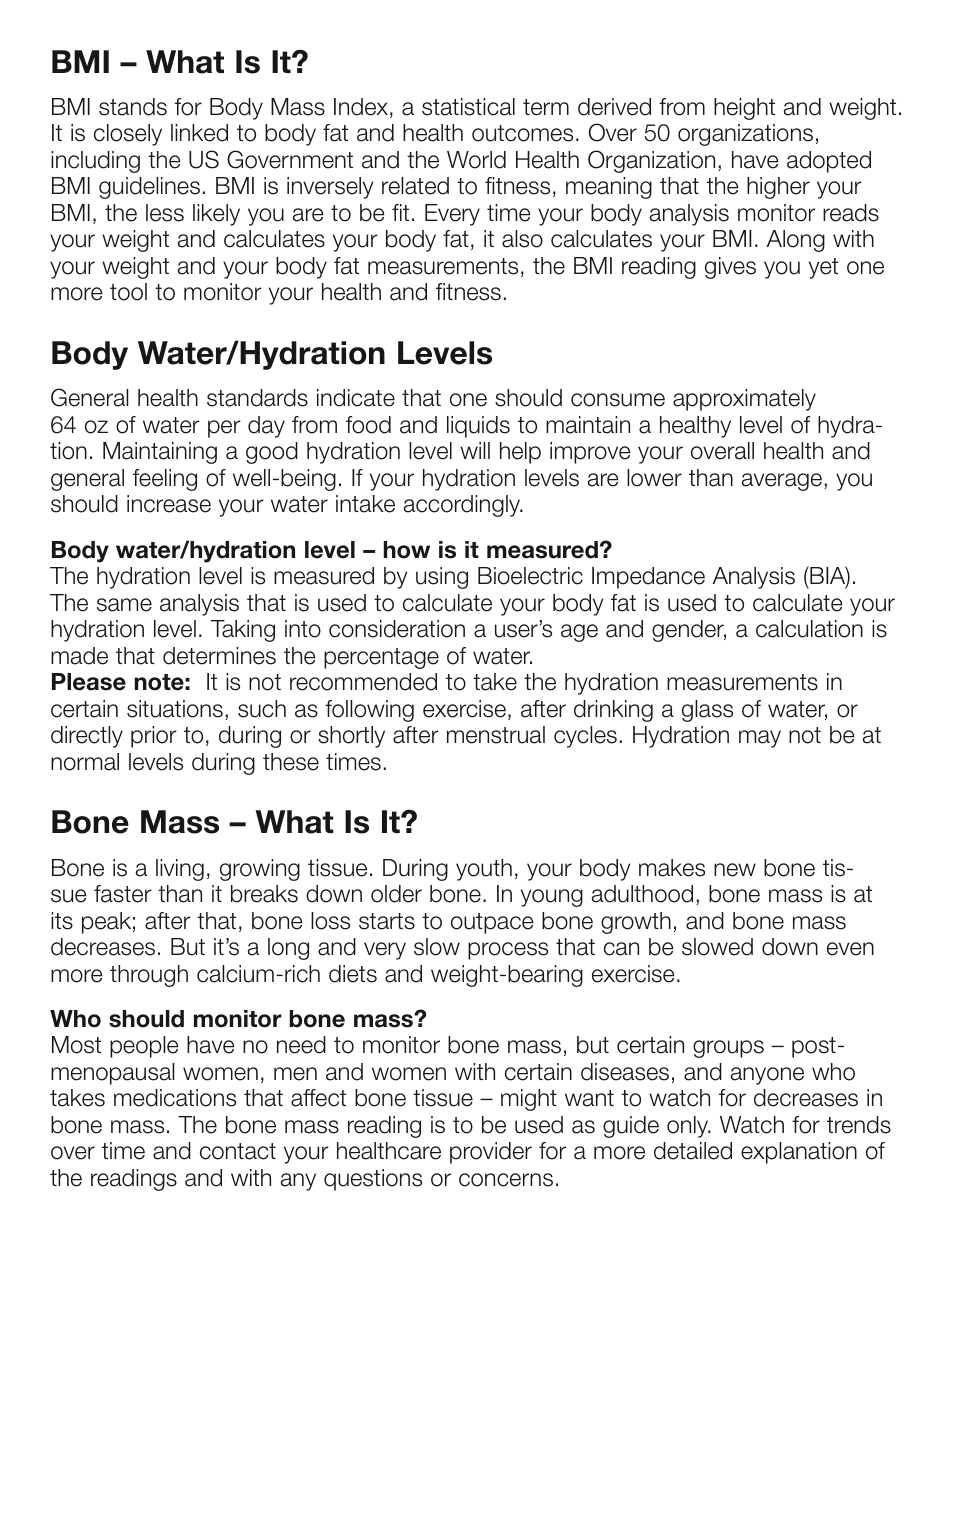 Bmi – what is it, Body water/hydration levels, Bone mass – what is it